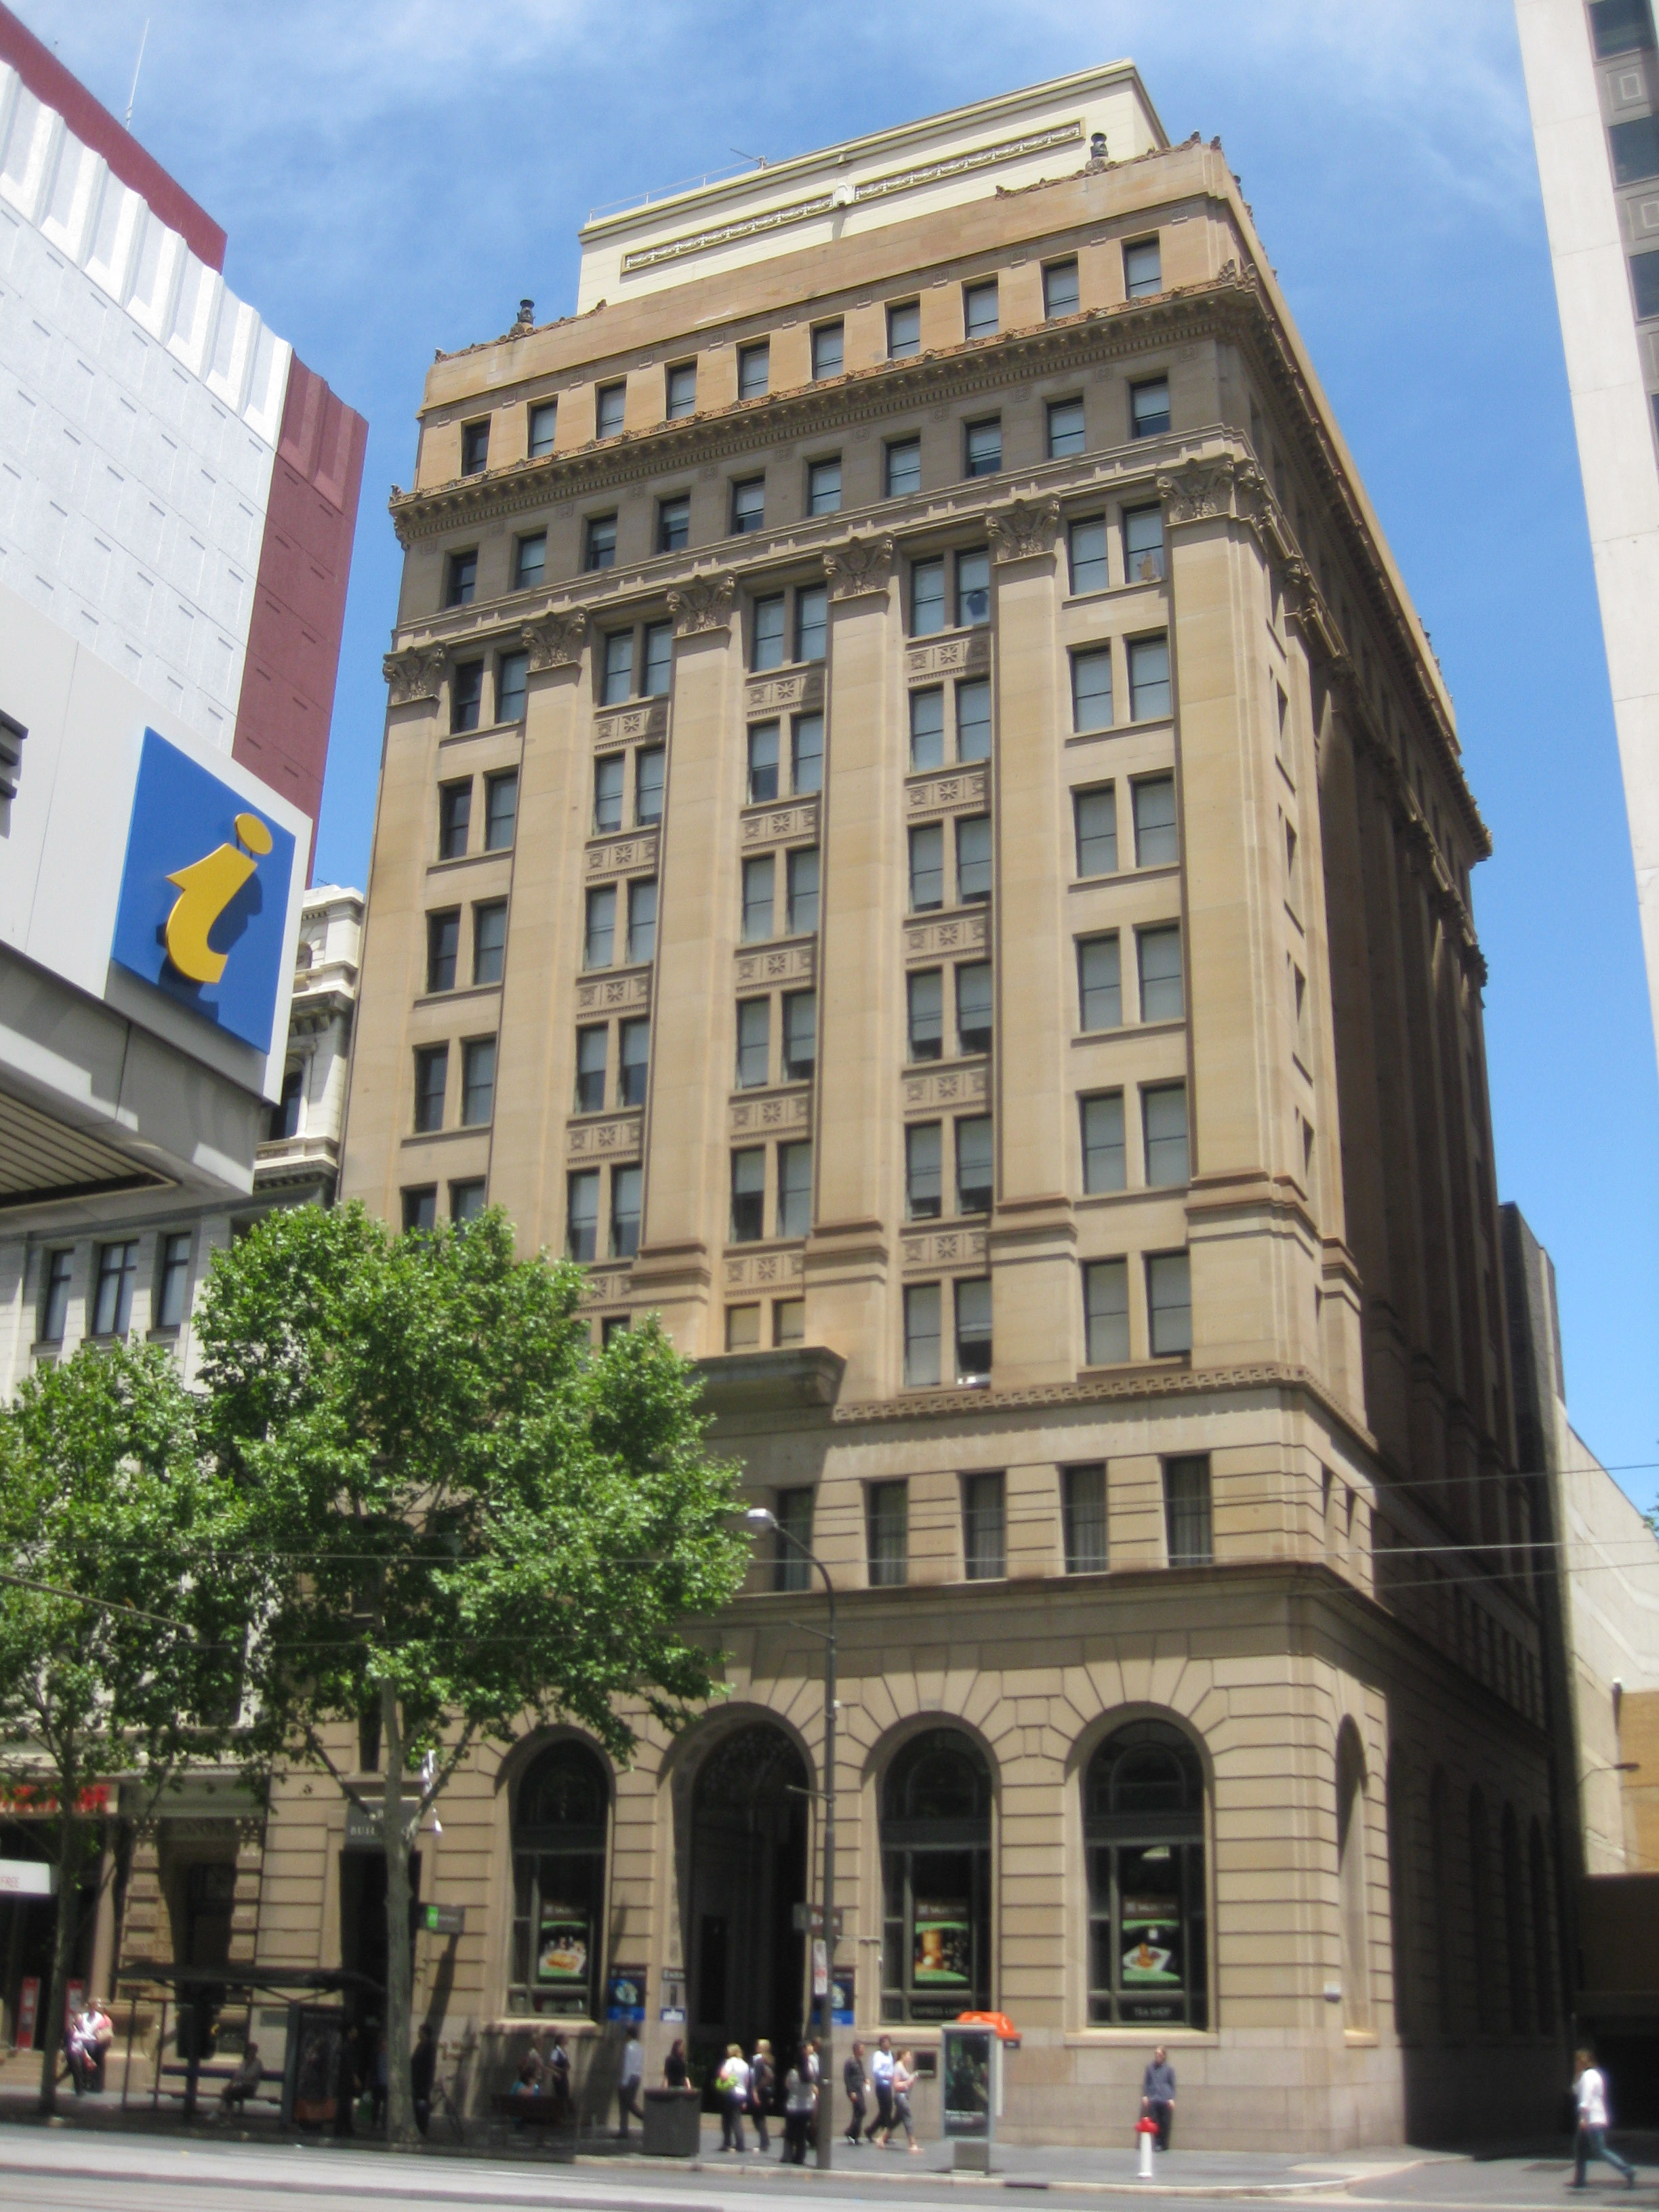 File:Old AMP building Adelaide.jpg - Wikimedia Commons